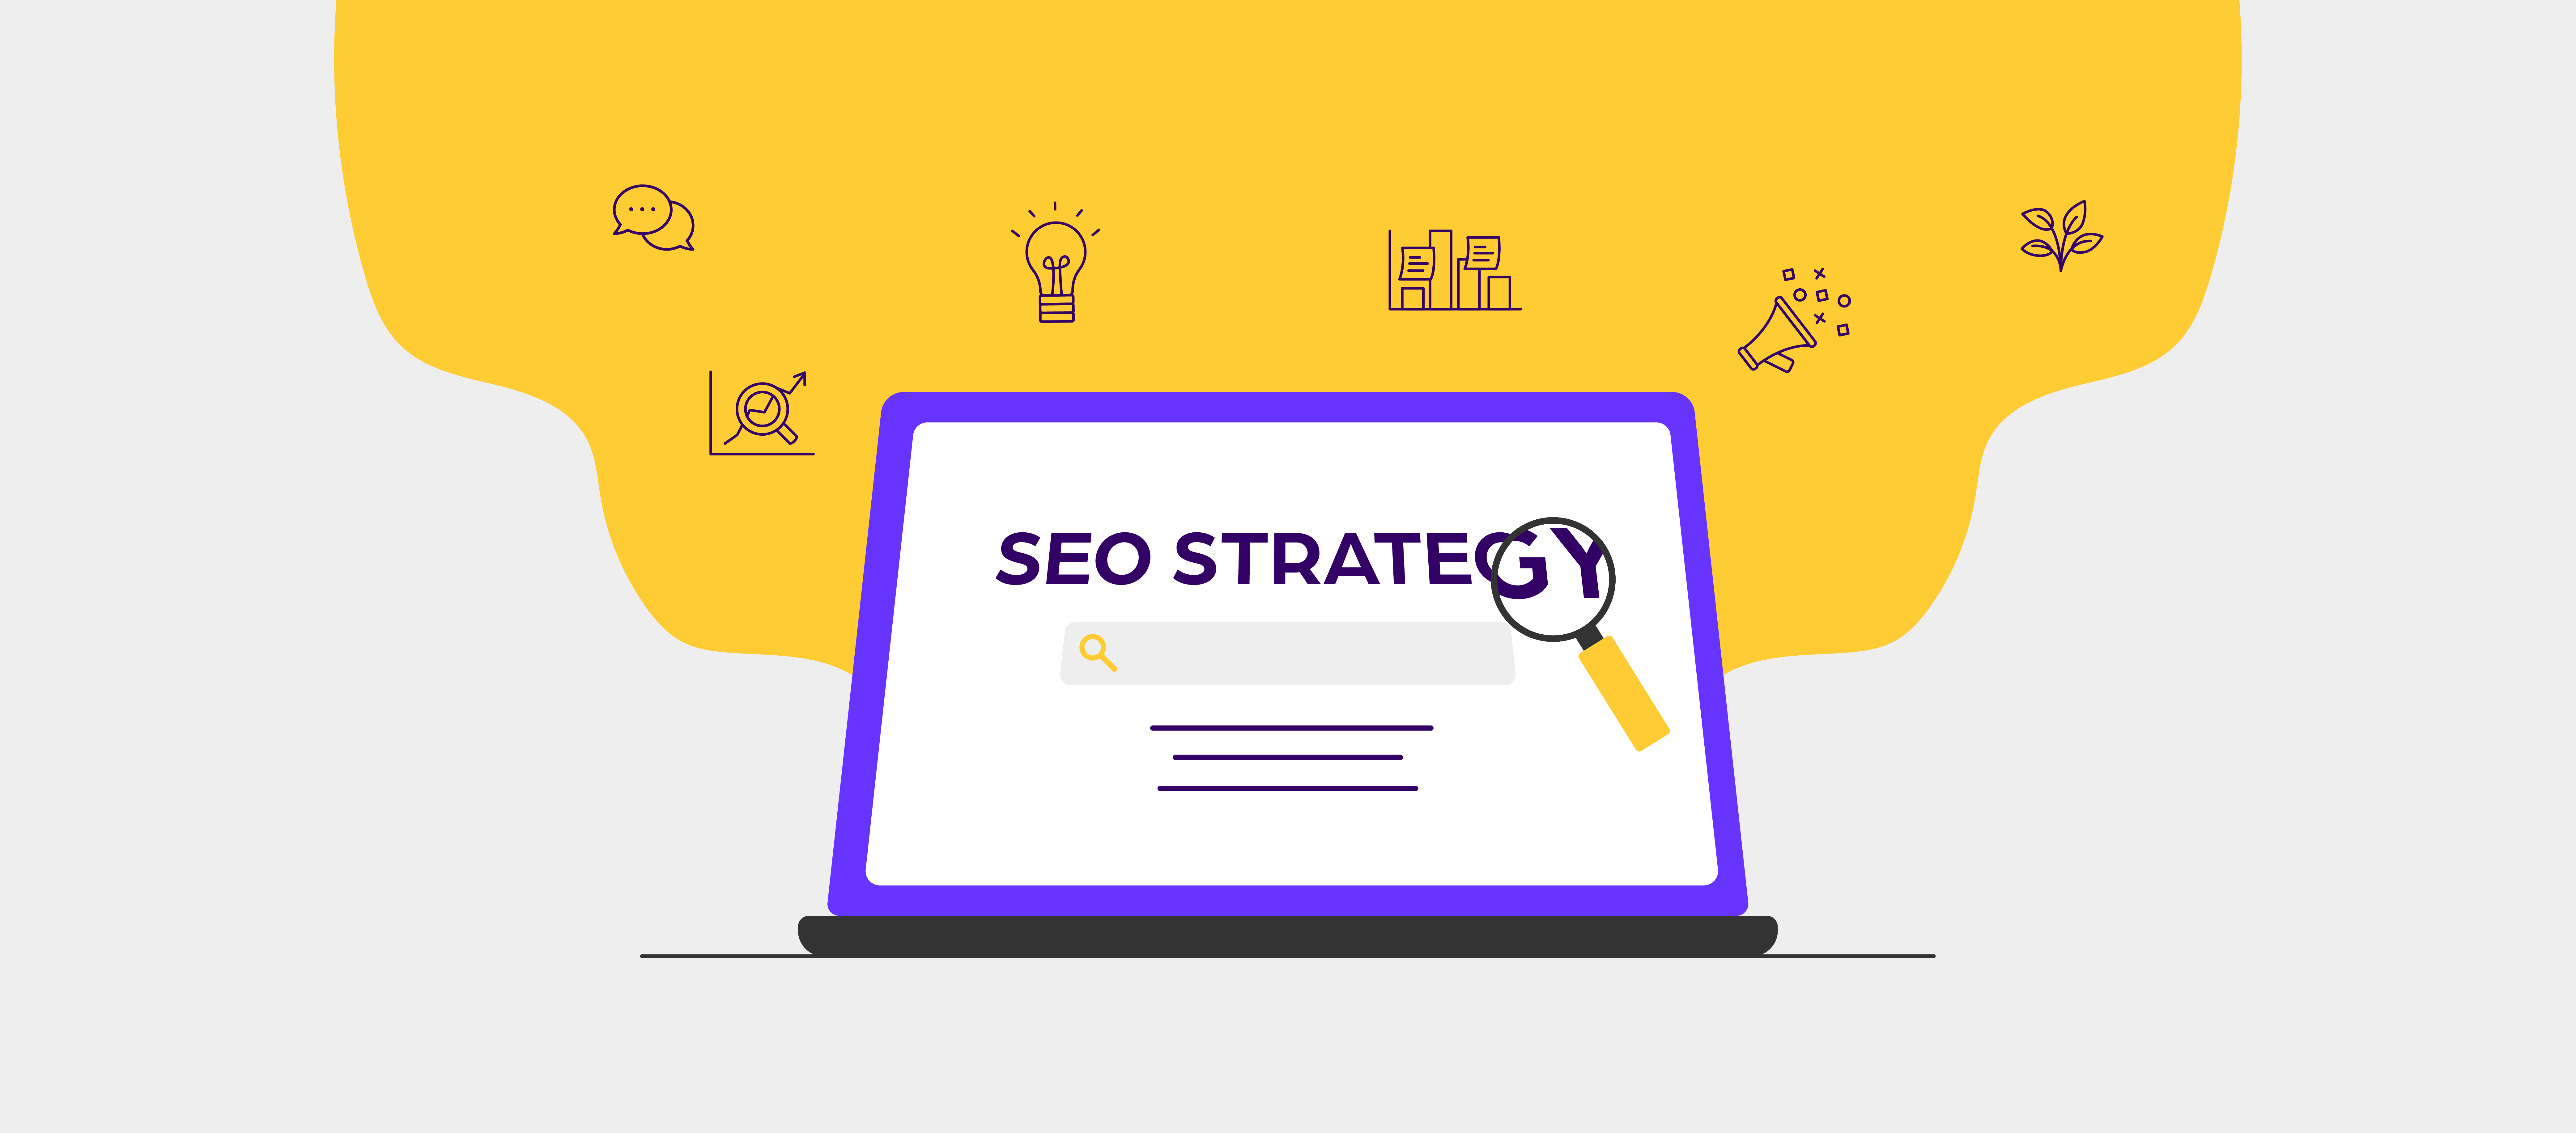 Graphic representation of an SEO content strategy